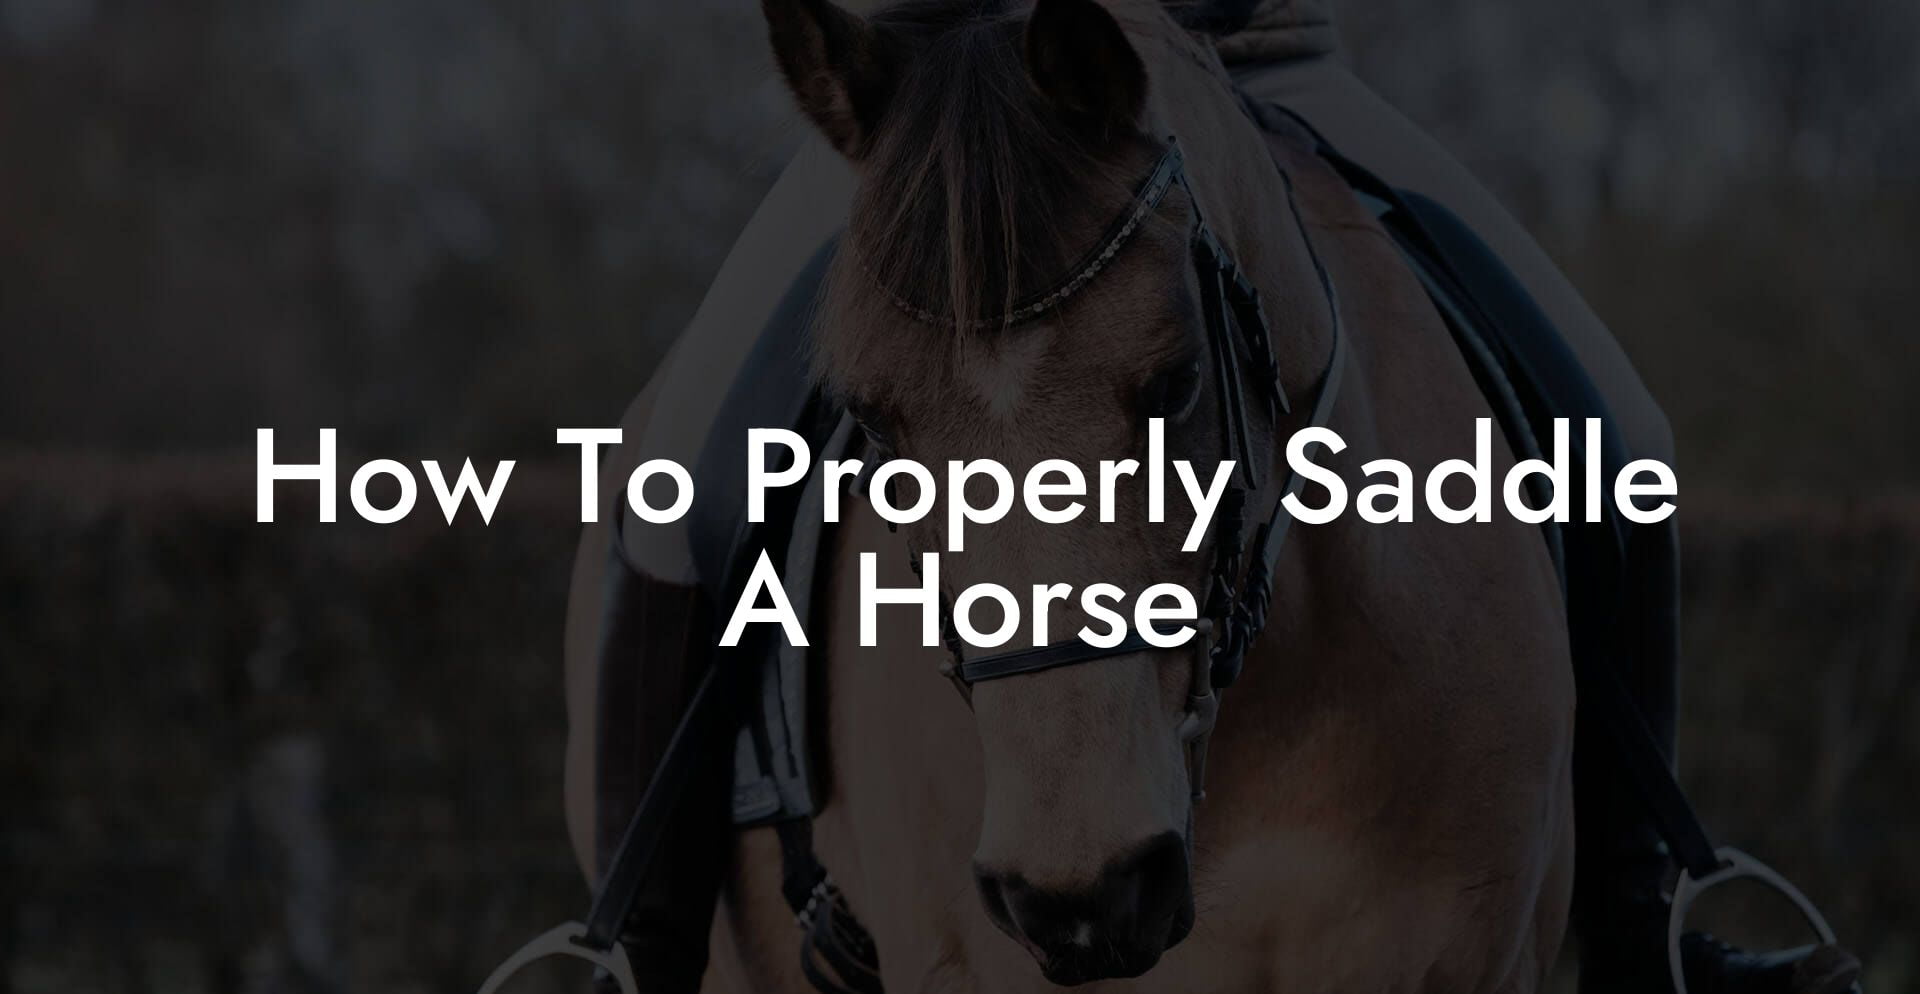 How To Properly Saddle A Horse - How To Own a Horse